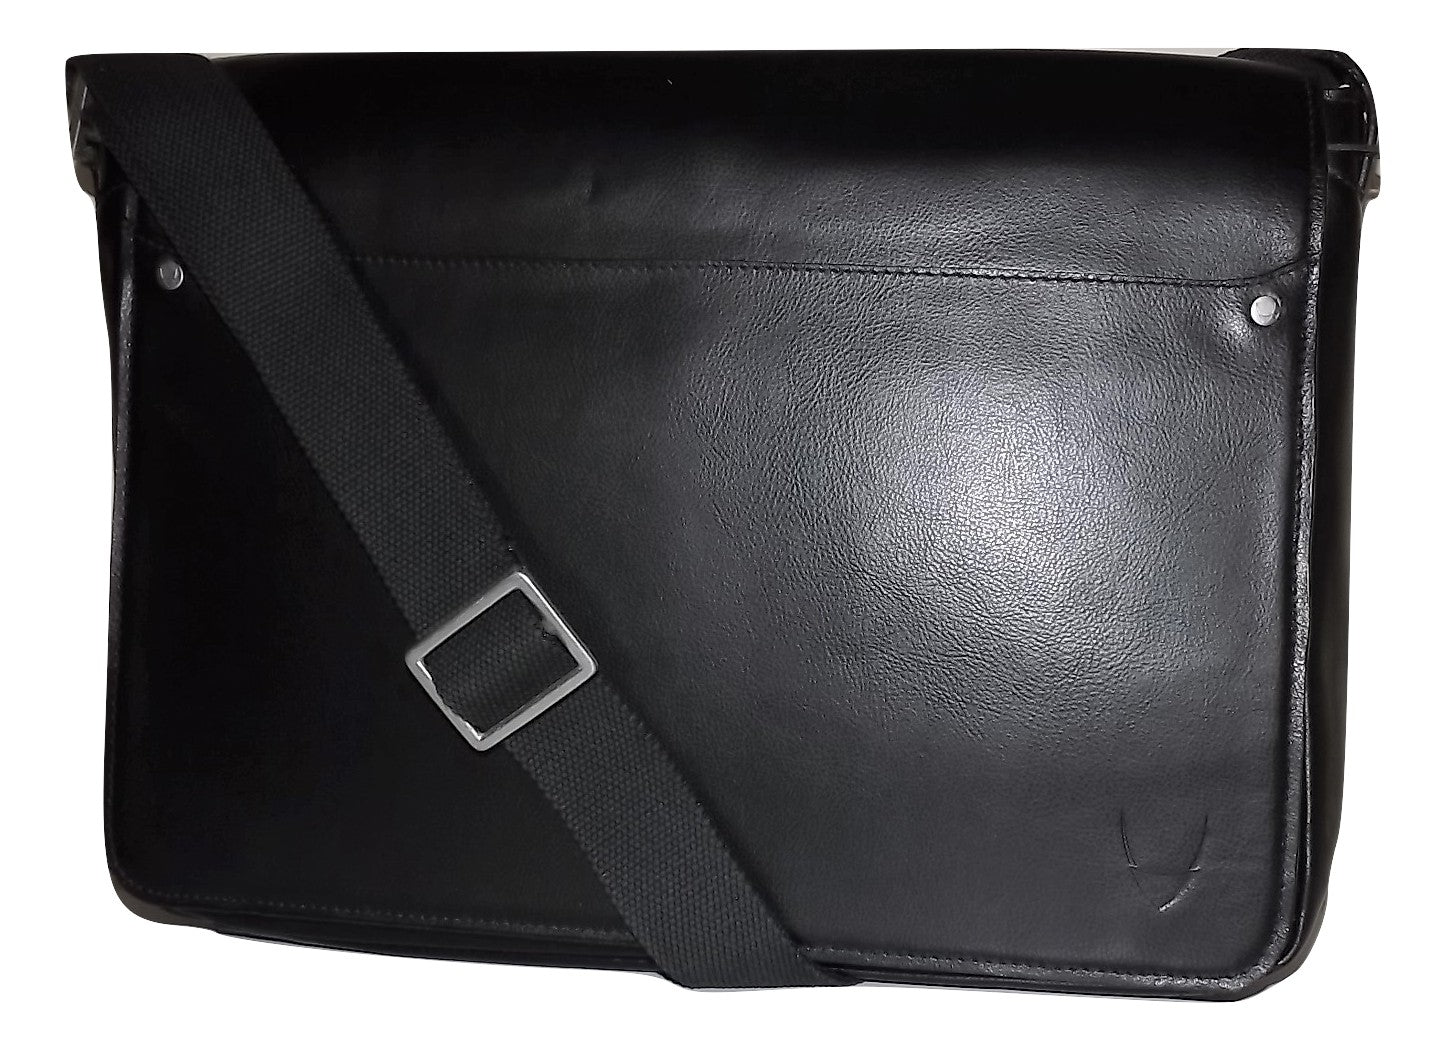 Scully Hidesign Leather Corporate Front Flap Messenger Brief Bag Black - Travel Trek Luggage ...